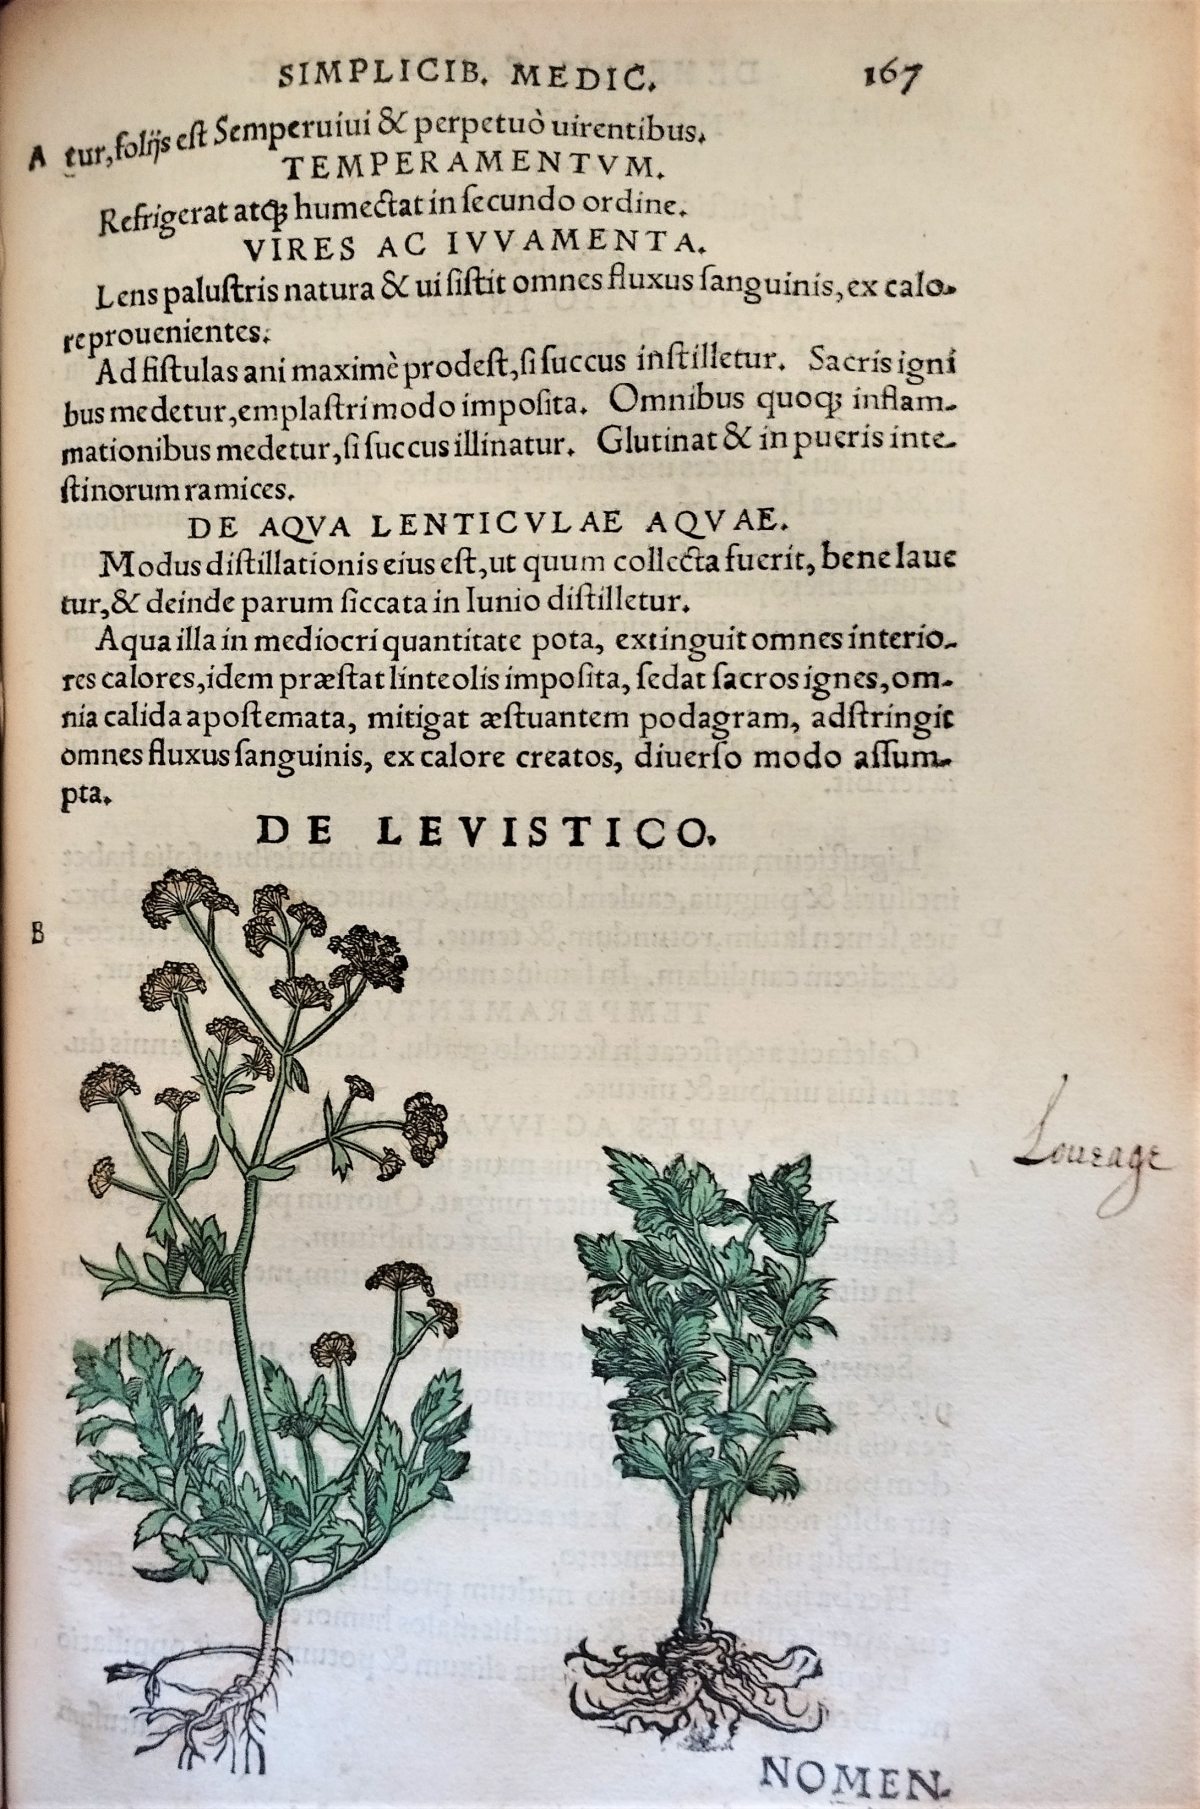 Page with the nomenclature, latin text description and hand painted illustration of the lovage plant and flowers.